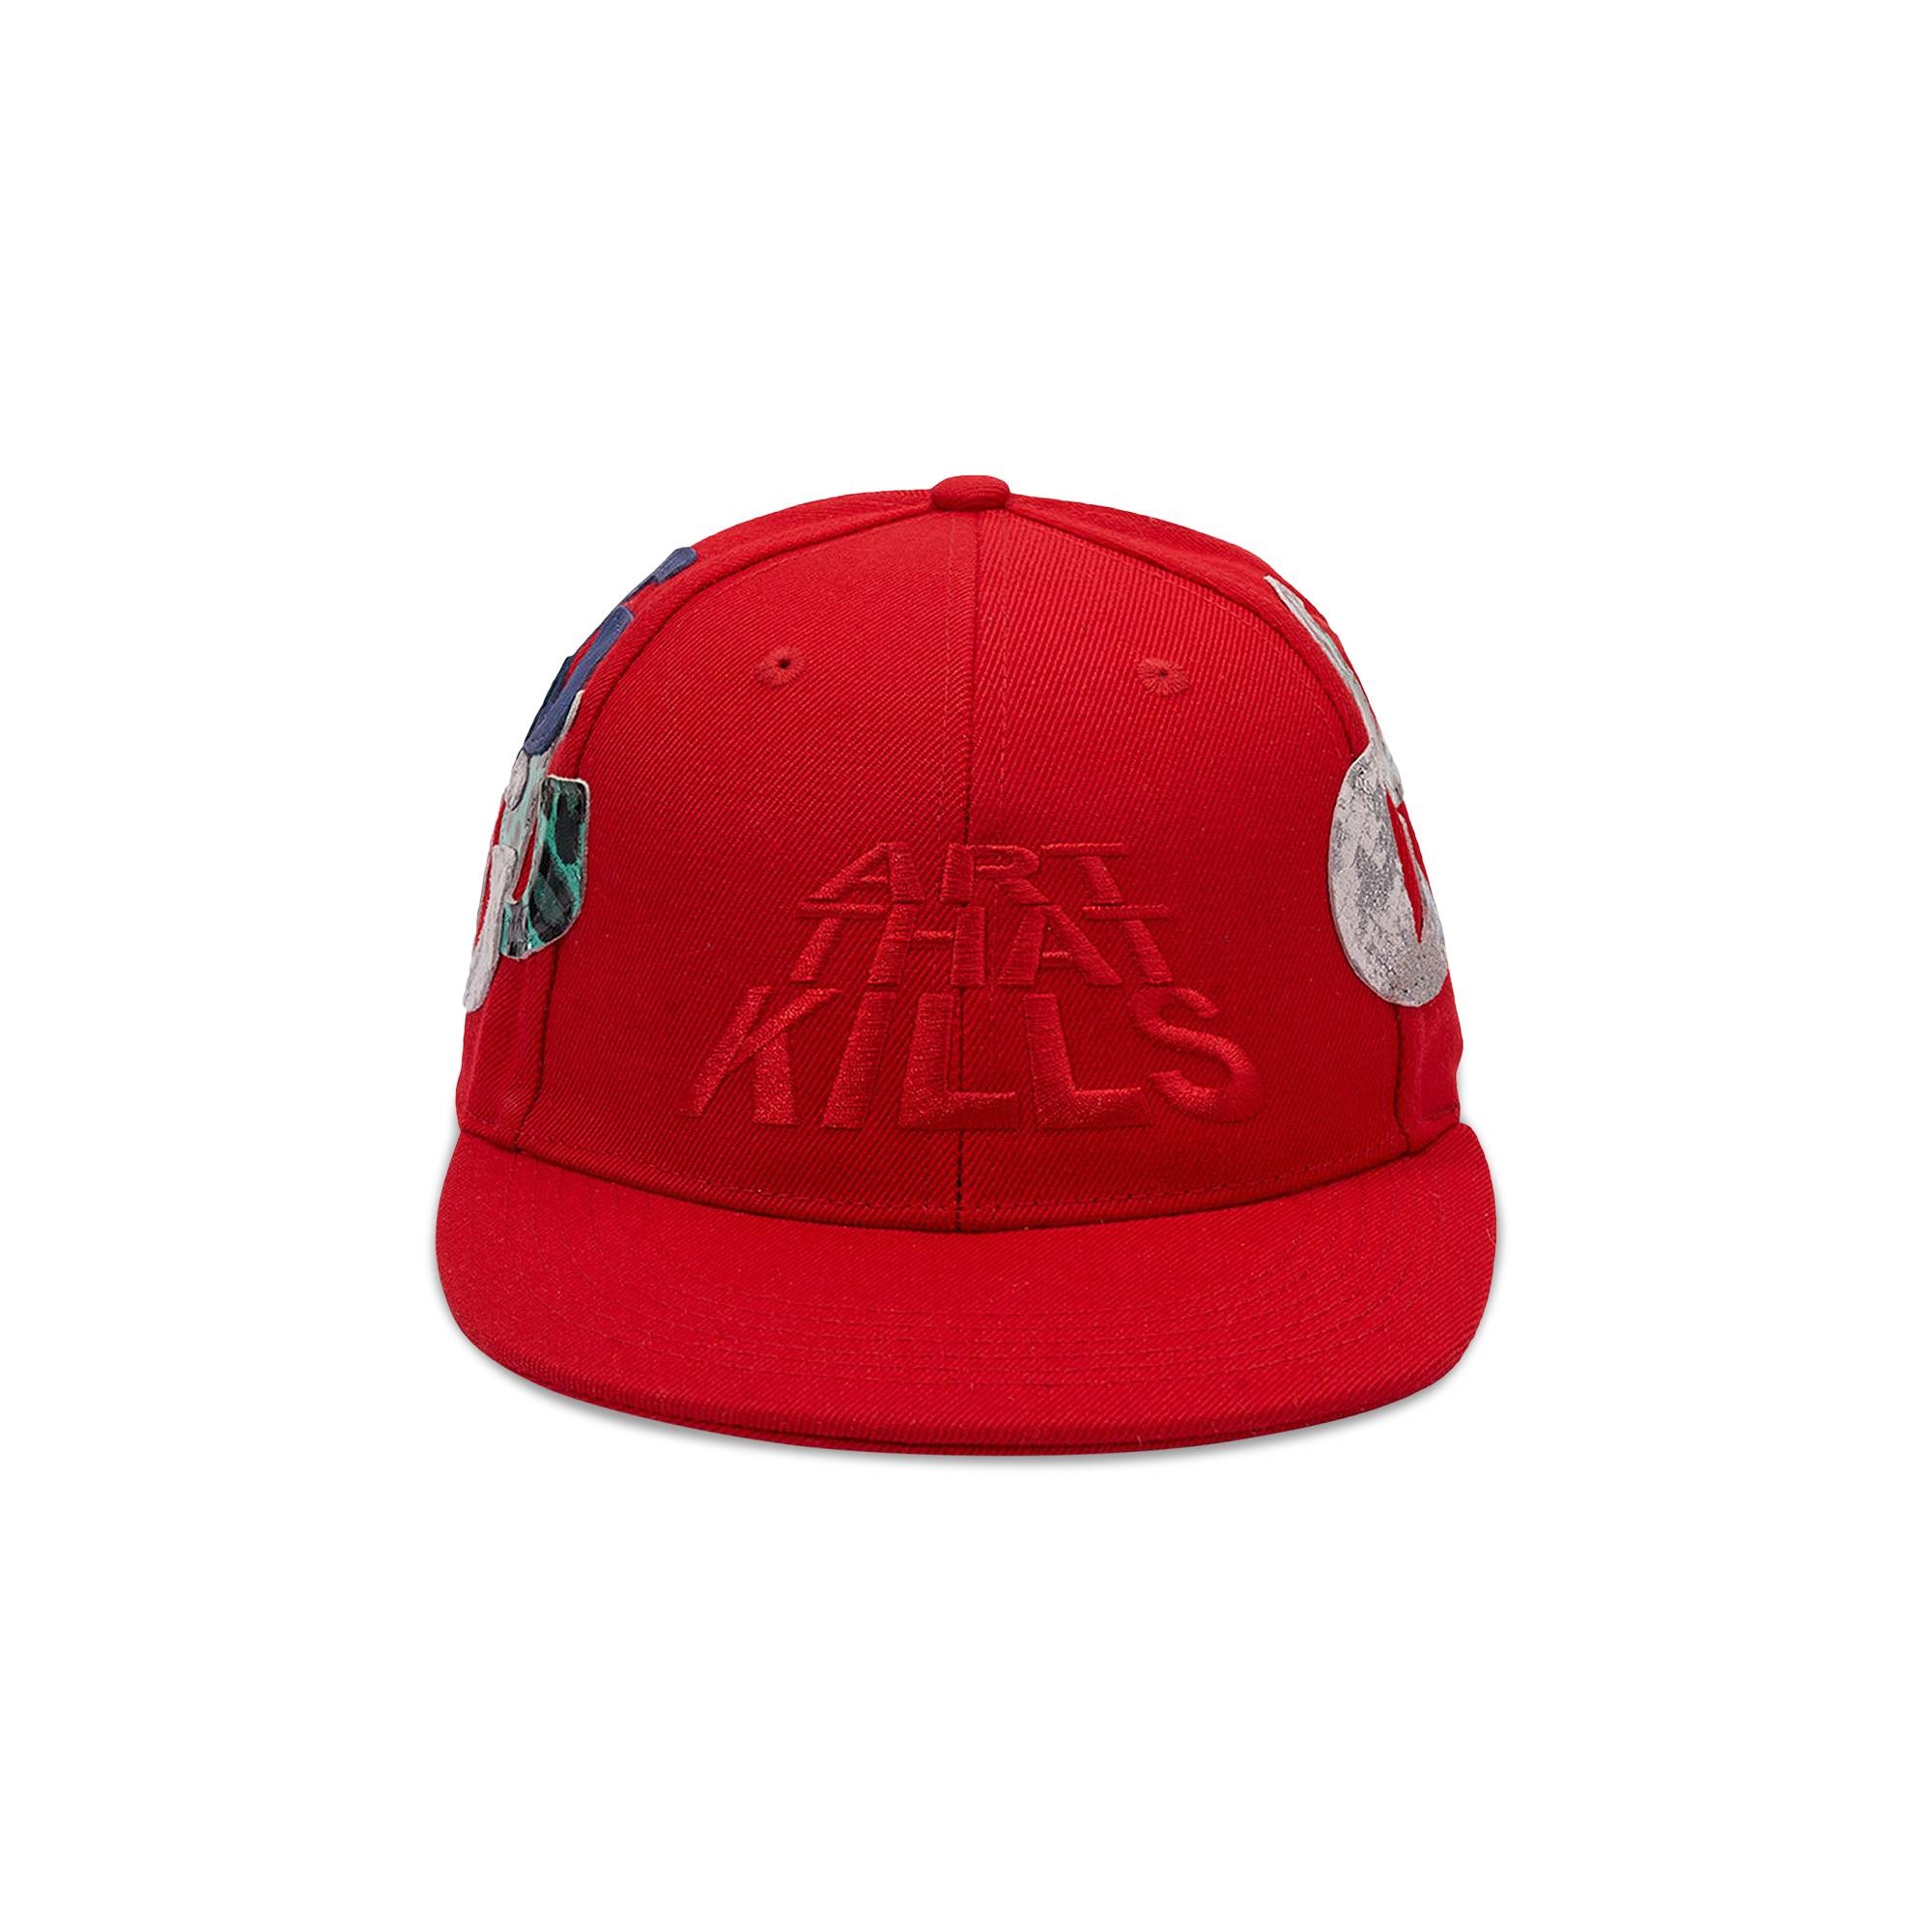 Gallery Dept. ATK G Patch Fitted Cap 'Red' - 1